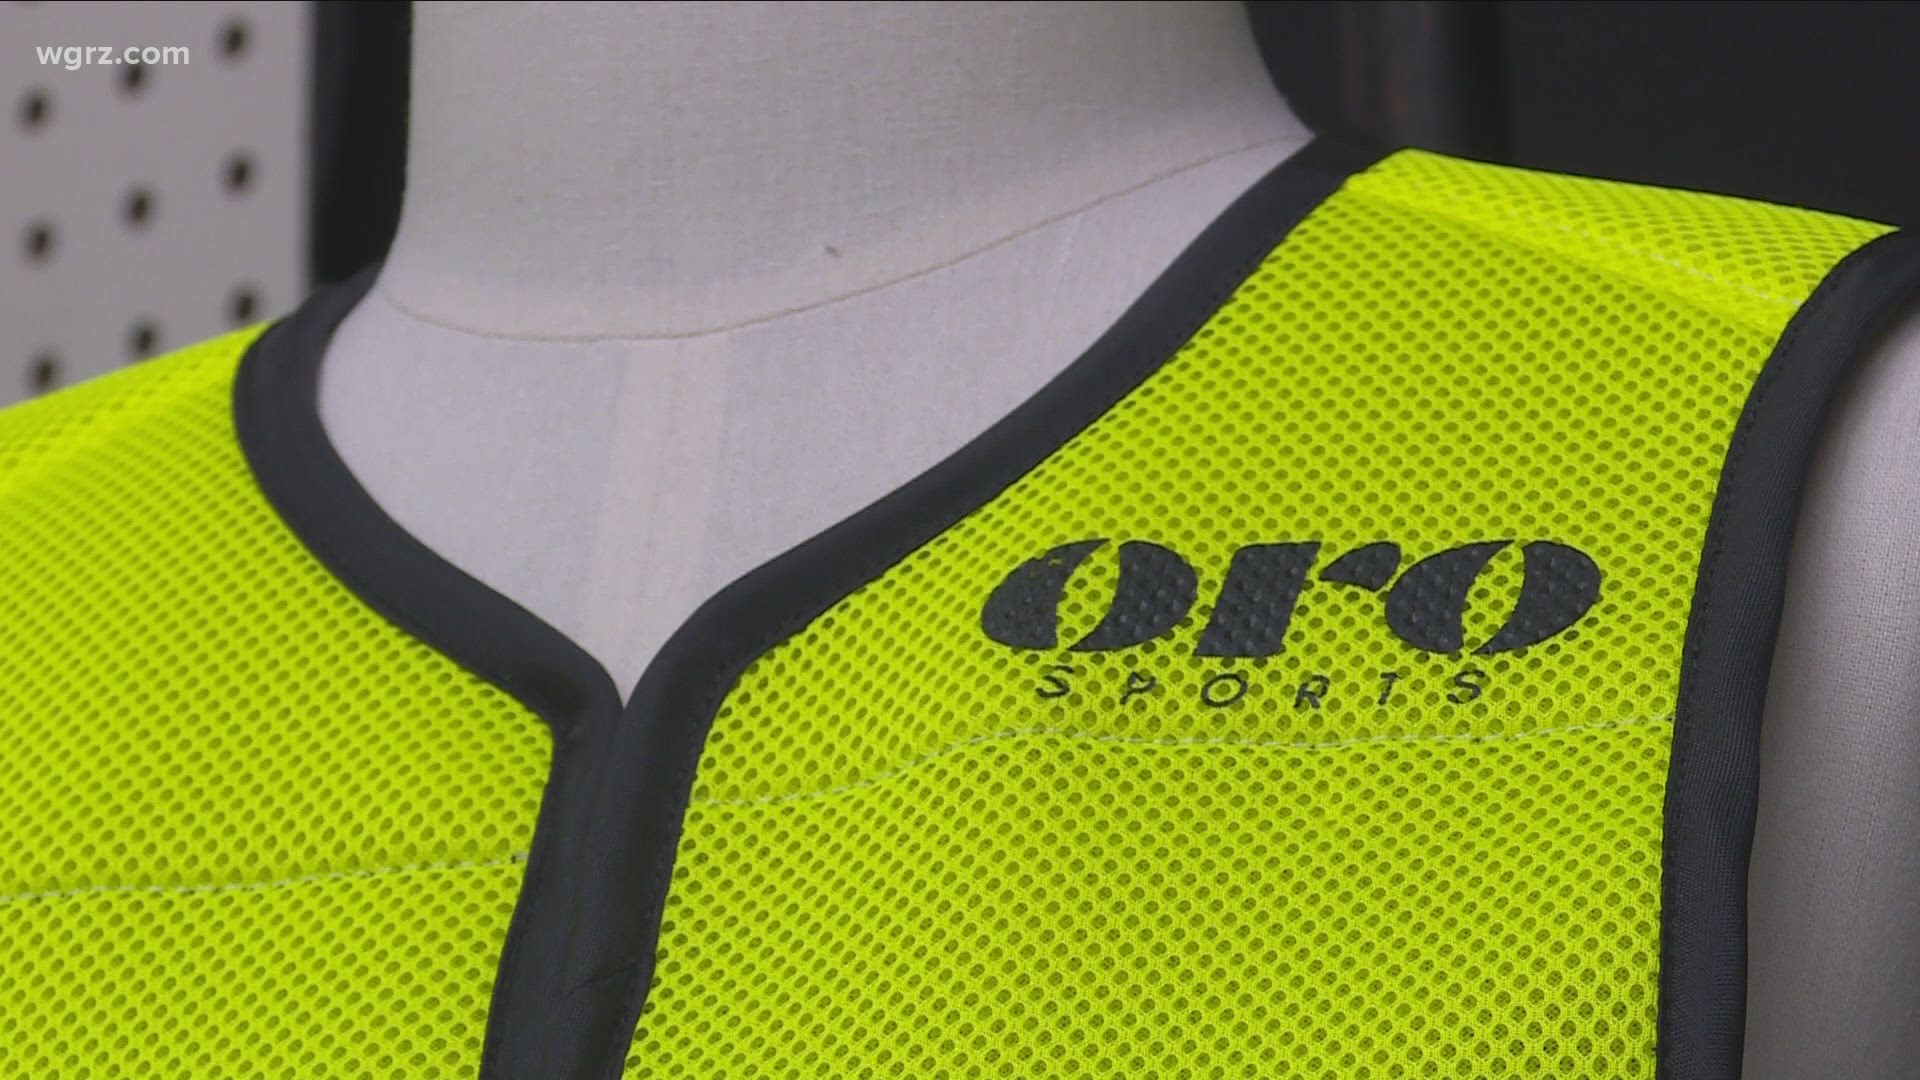 Olympians wearing vests made in Buffalo at Oro Sports company